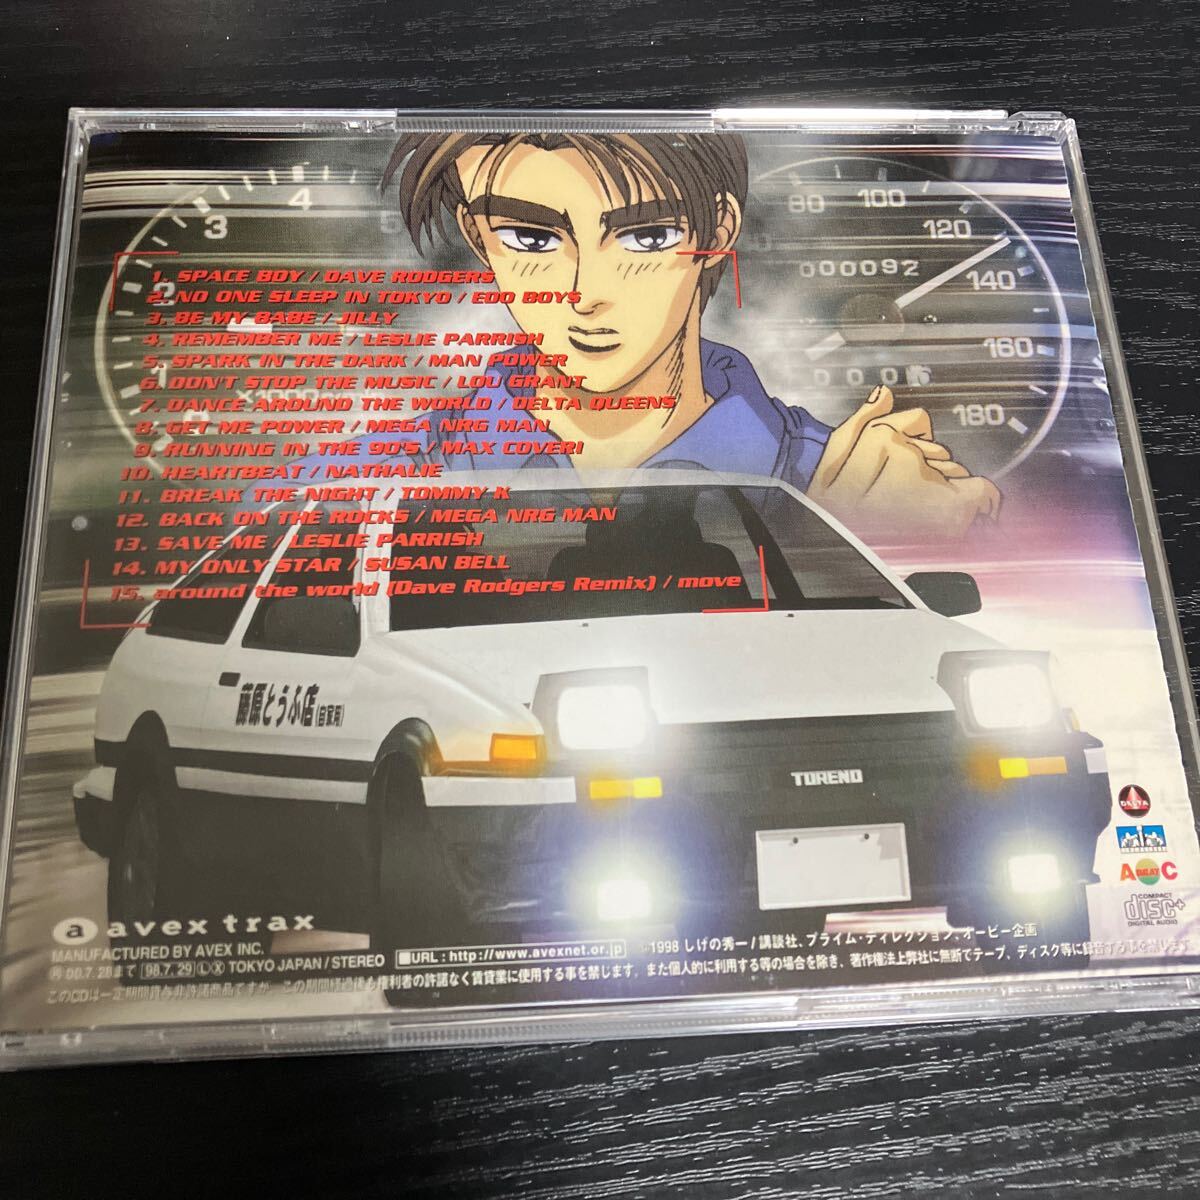 [ Junk scratch many ] initials d selection 1&3 CD super eurobeat* free shipping 